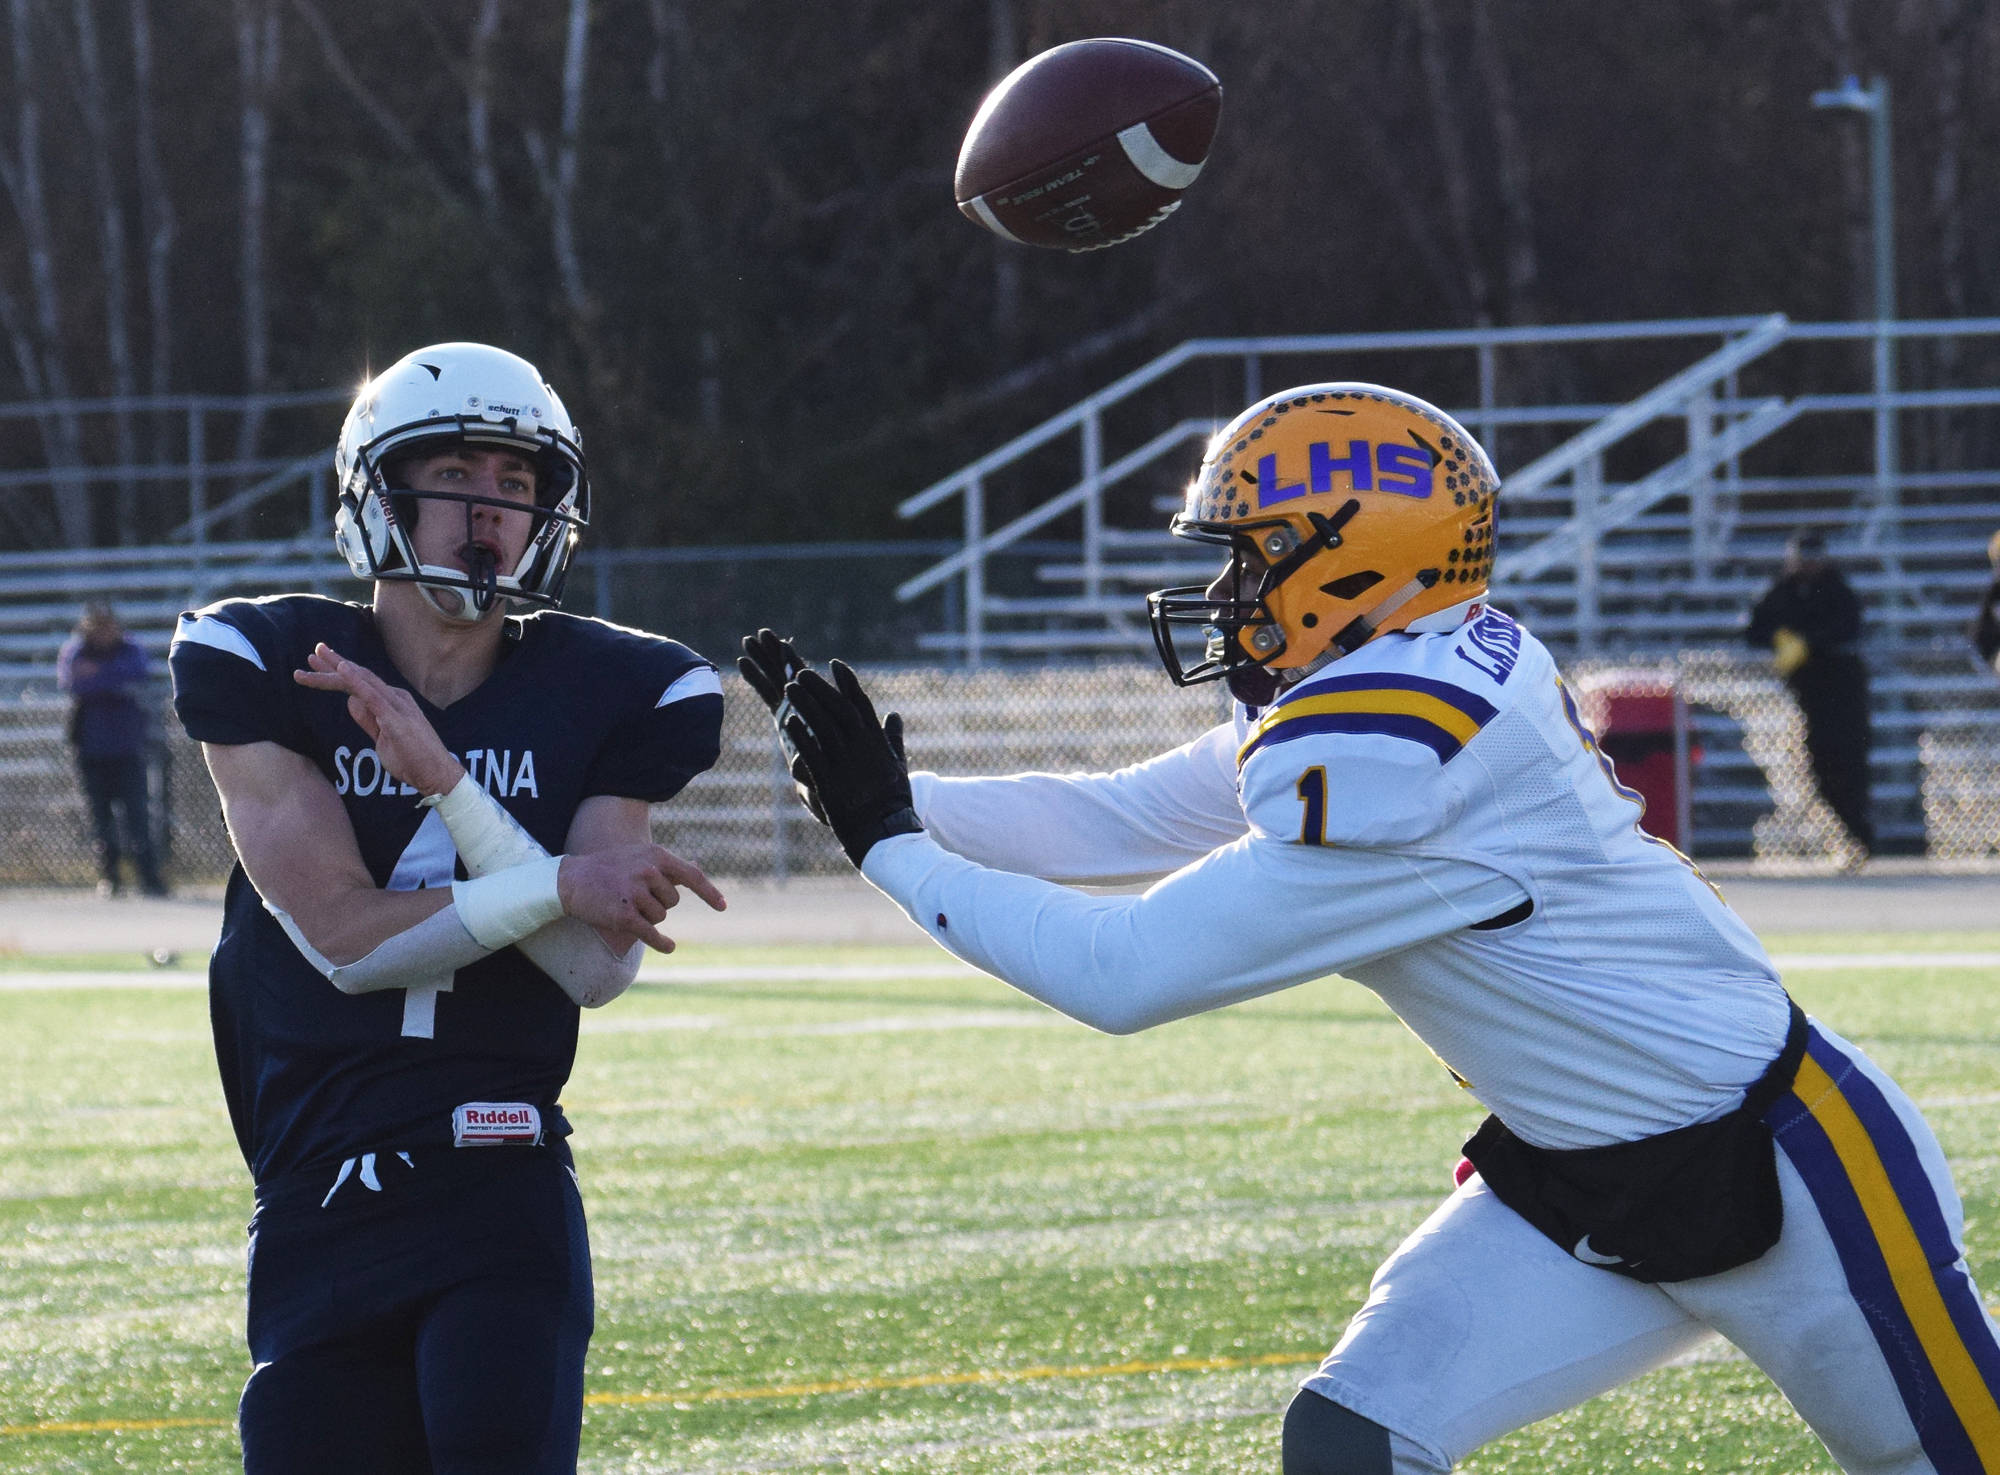 Soldotna quarterback Jersey Truesdell throws a pass with pressure from Lathrop’s Jace Henry, Saturday, Oct. 19, 2019, at the Div. II state football championship at Anchorage Football Stadium in Anchorage, Alaska. (Photo by Joey Klecka/Peninsula Clarion)